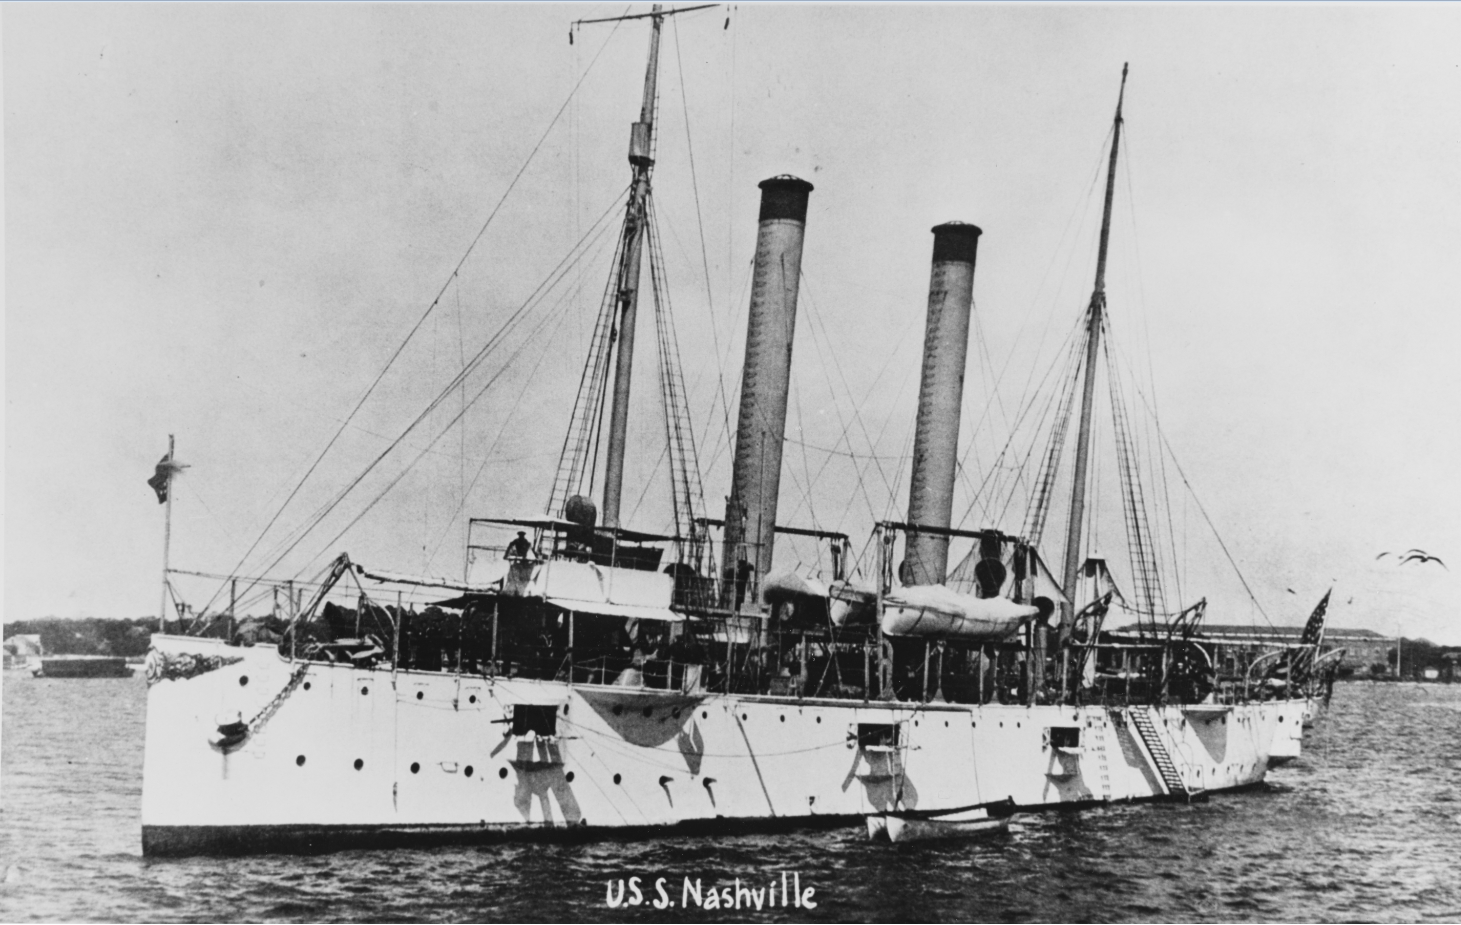 The U.S. war ship, Nashville, arrives in Panama to provide support for the Panamanian revolution and Panama claims independence from Columbia two days later.